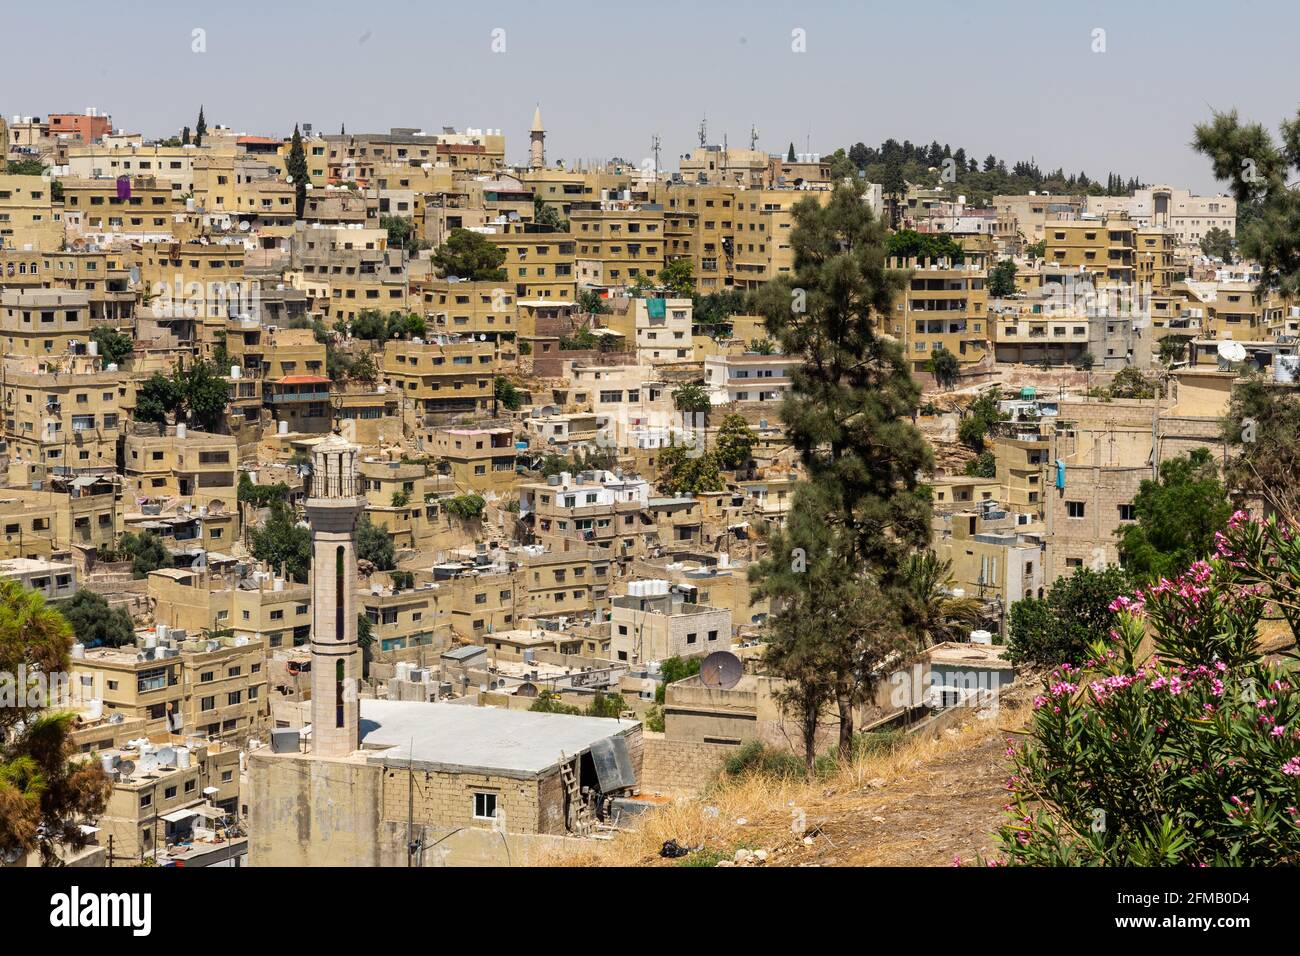 Top view of old town of Amman, Jordan with low-rise blocks of residential buildings and old mosque Stock Photo